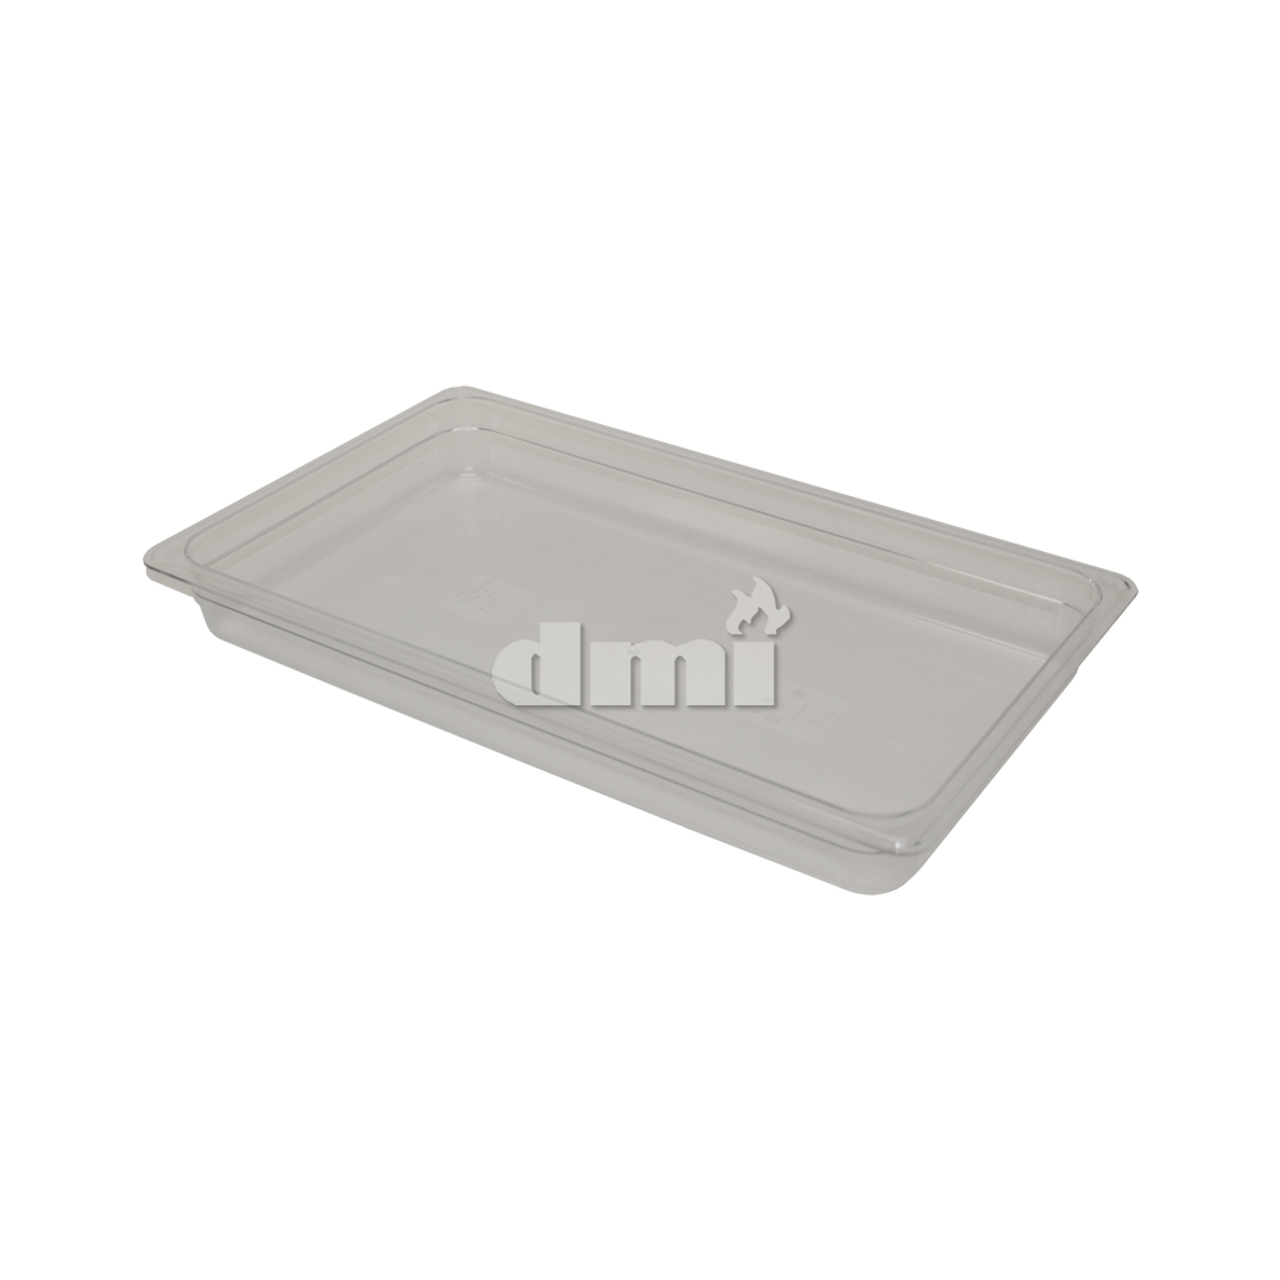 8751-2  Full Size Clear Pan, 2.5" Deep